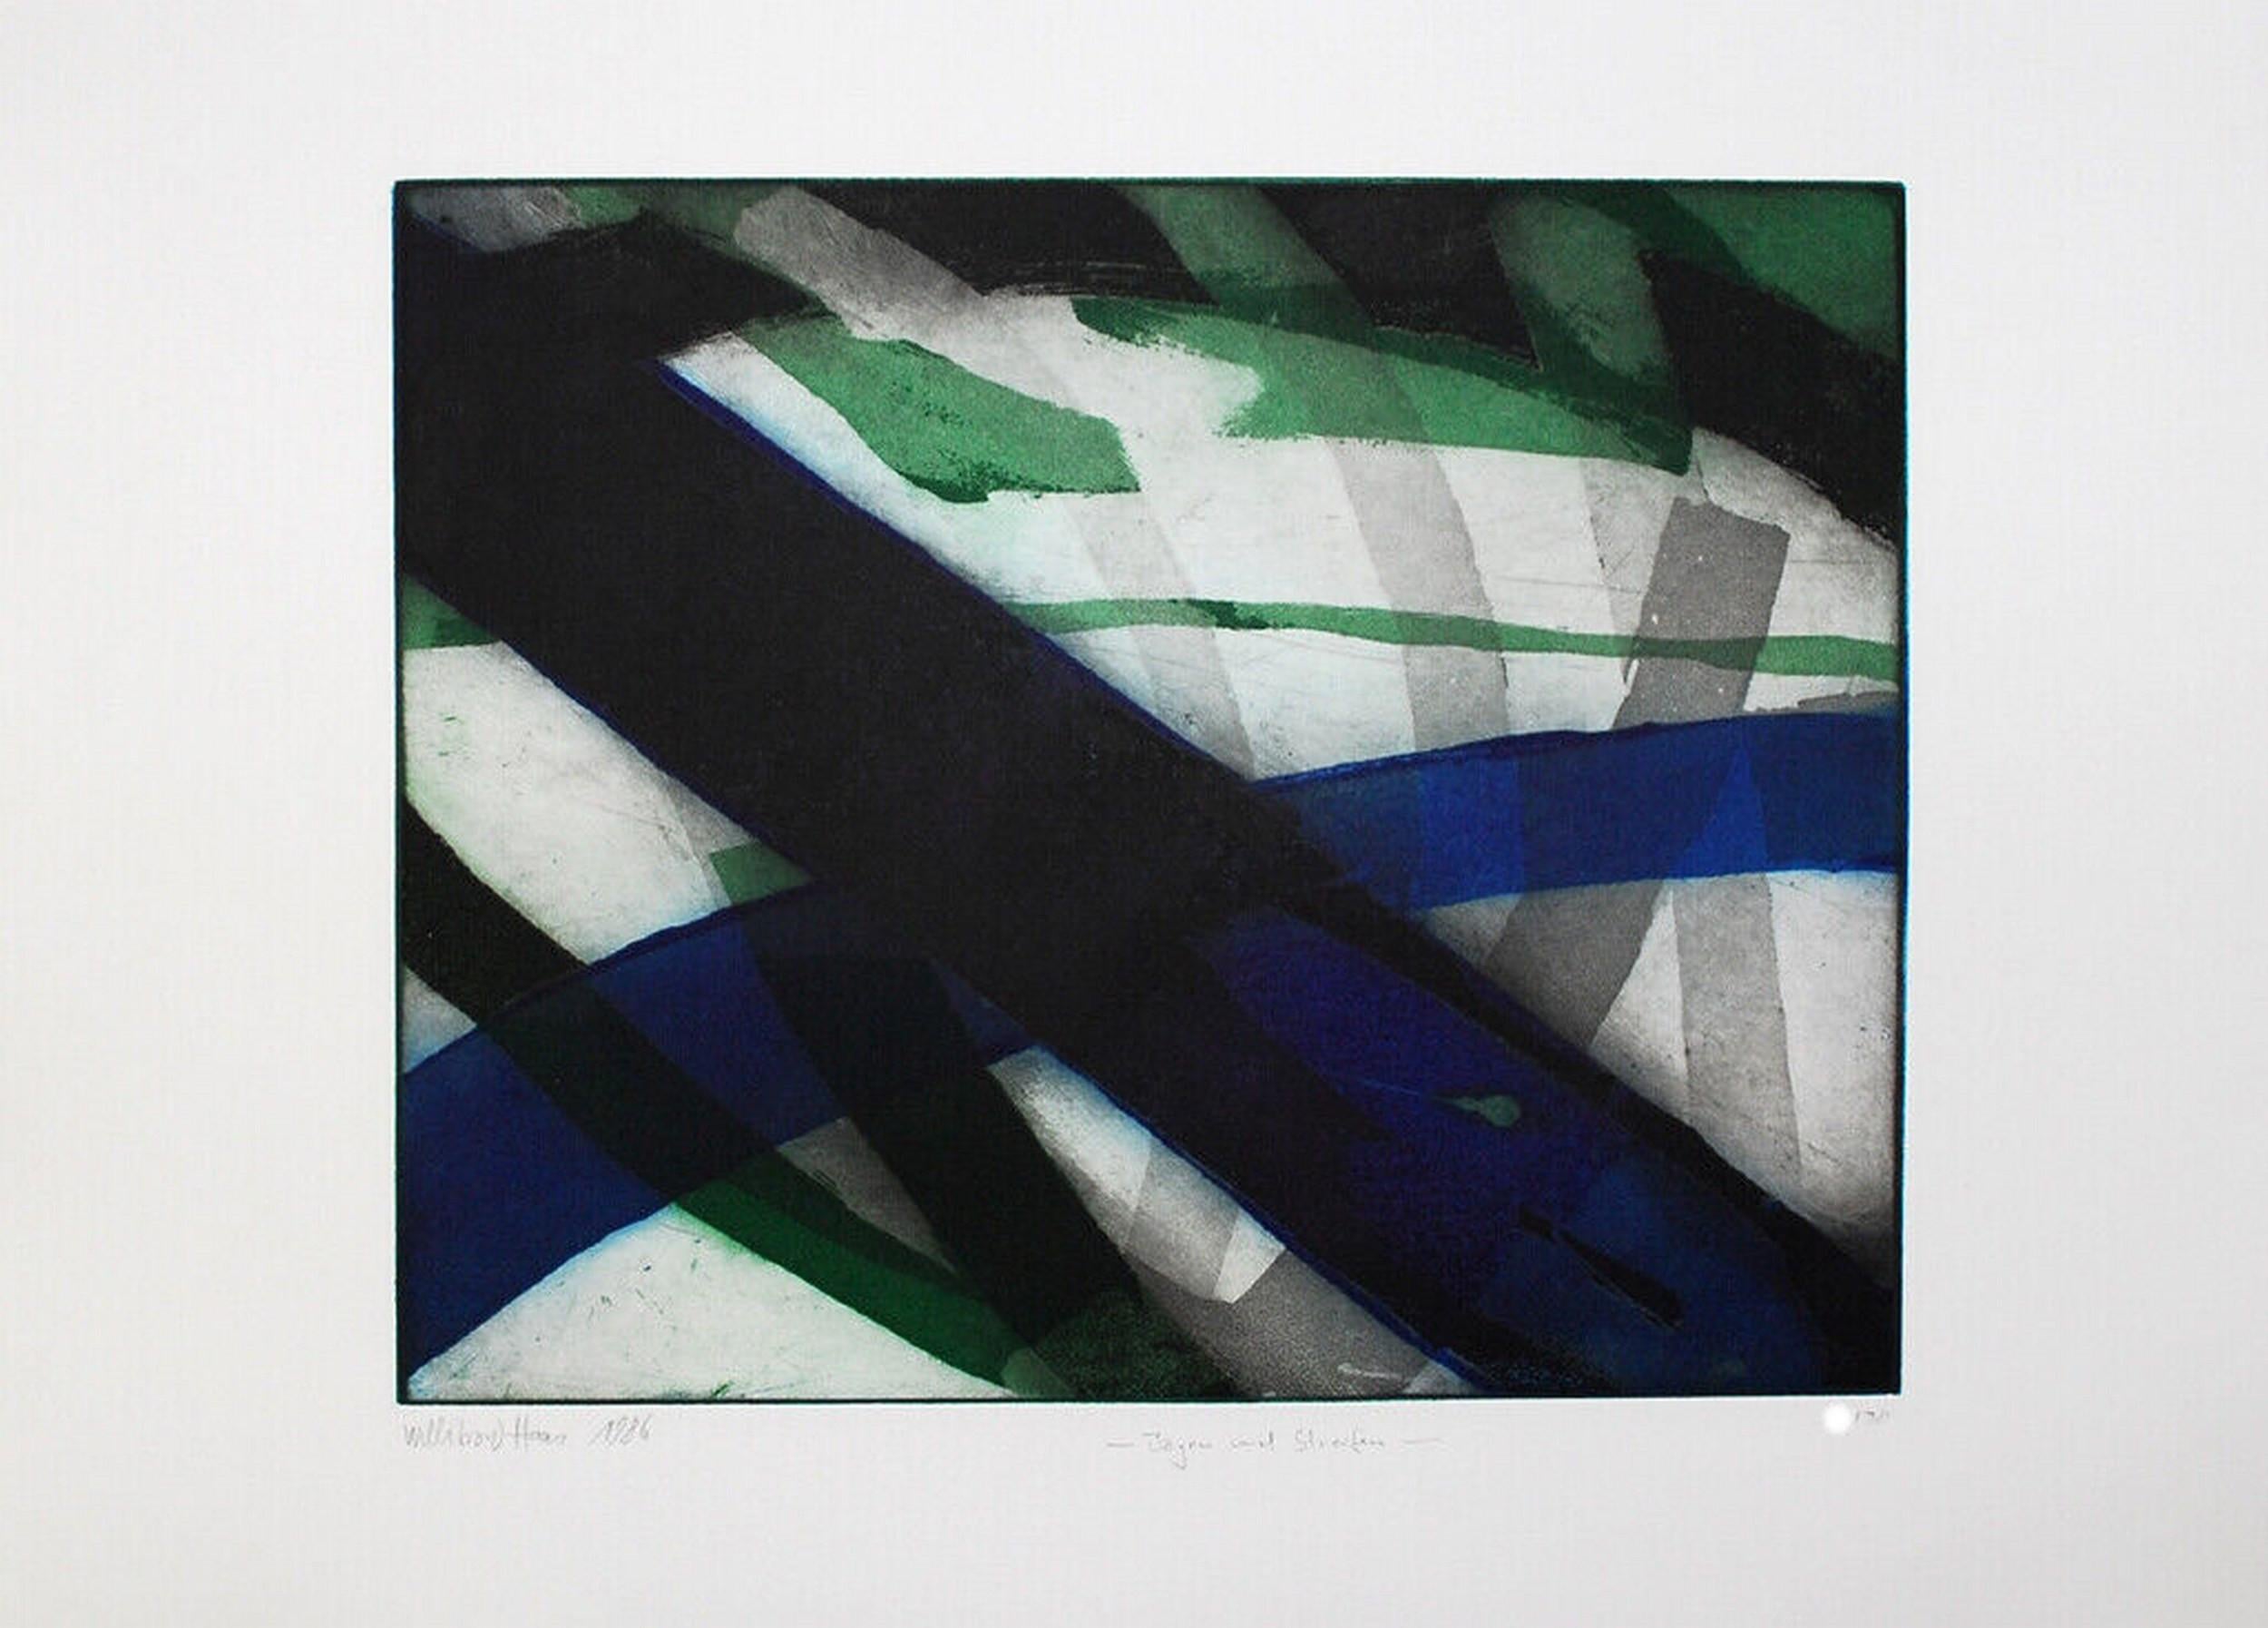 Willibrord Haas Abstract Print - Arches & Stripes (Post-war Abstraction, Joseph Beuys) (~35% OFF)